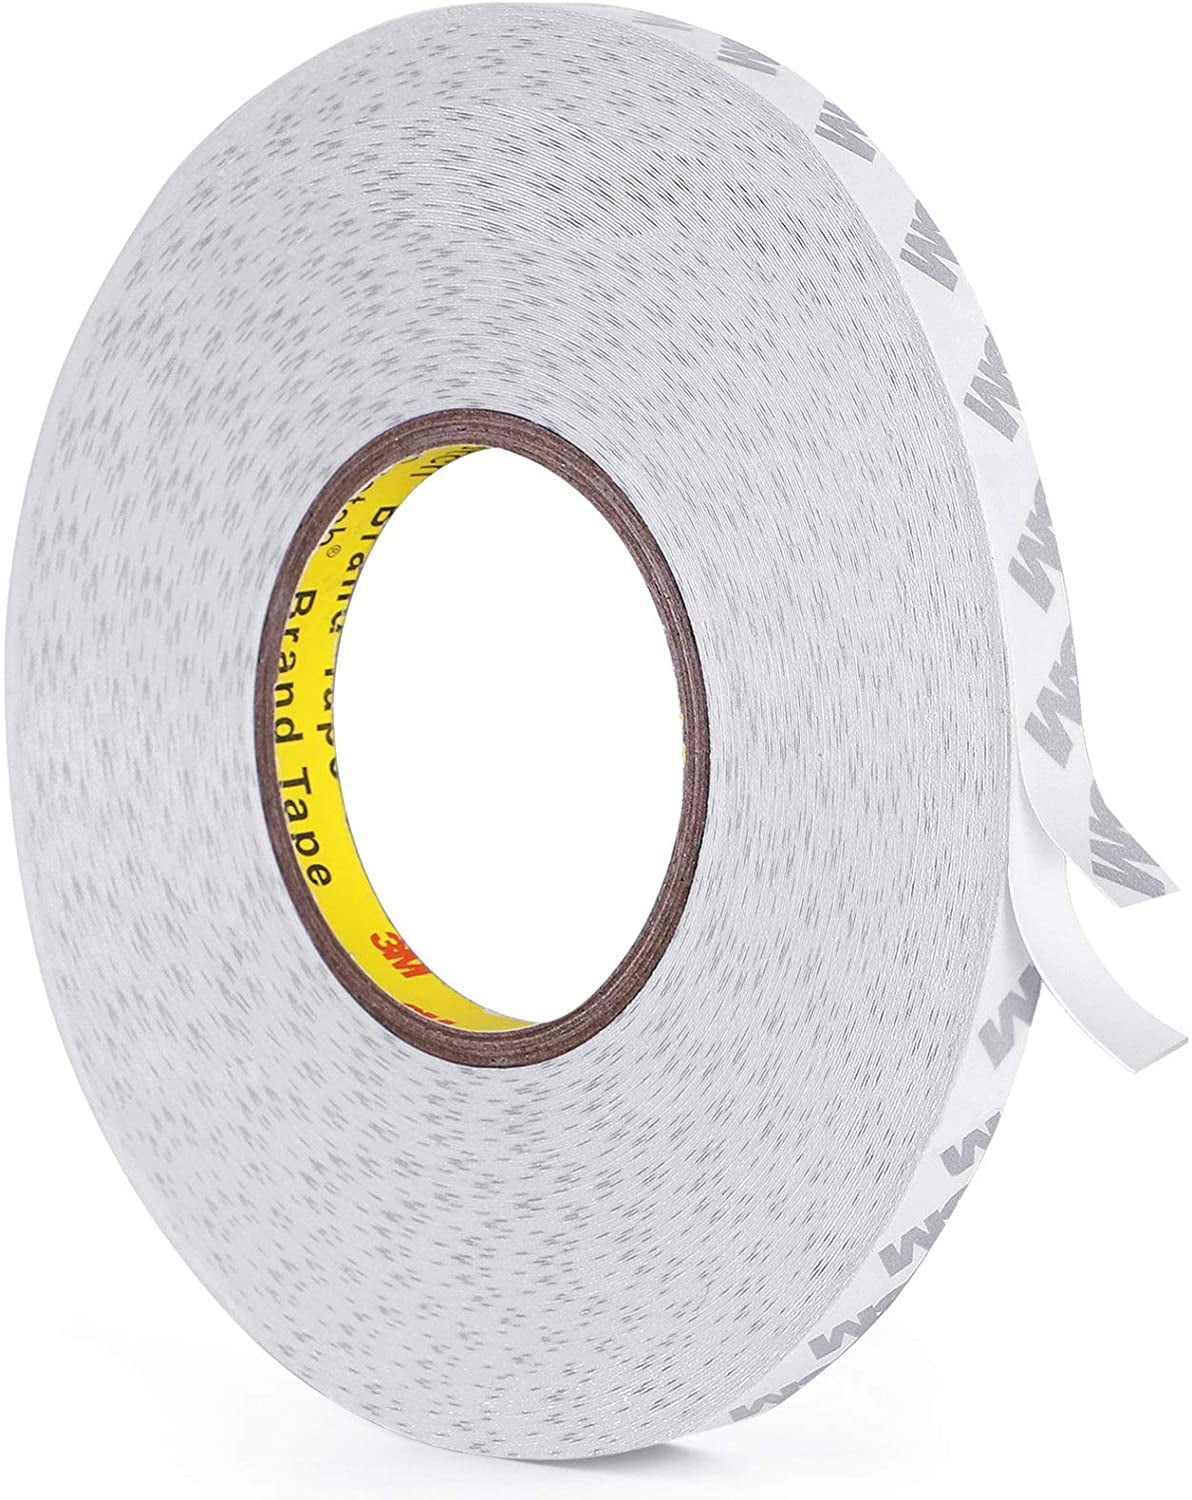 XFasten Extra Strength Double-Sided Tape, White, 3/4-Inch x 15-Yard (Pack of 3) - Extra Sticky for Heavy Duty Bonding (15 Yards per Roll)